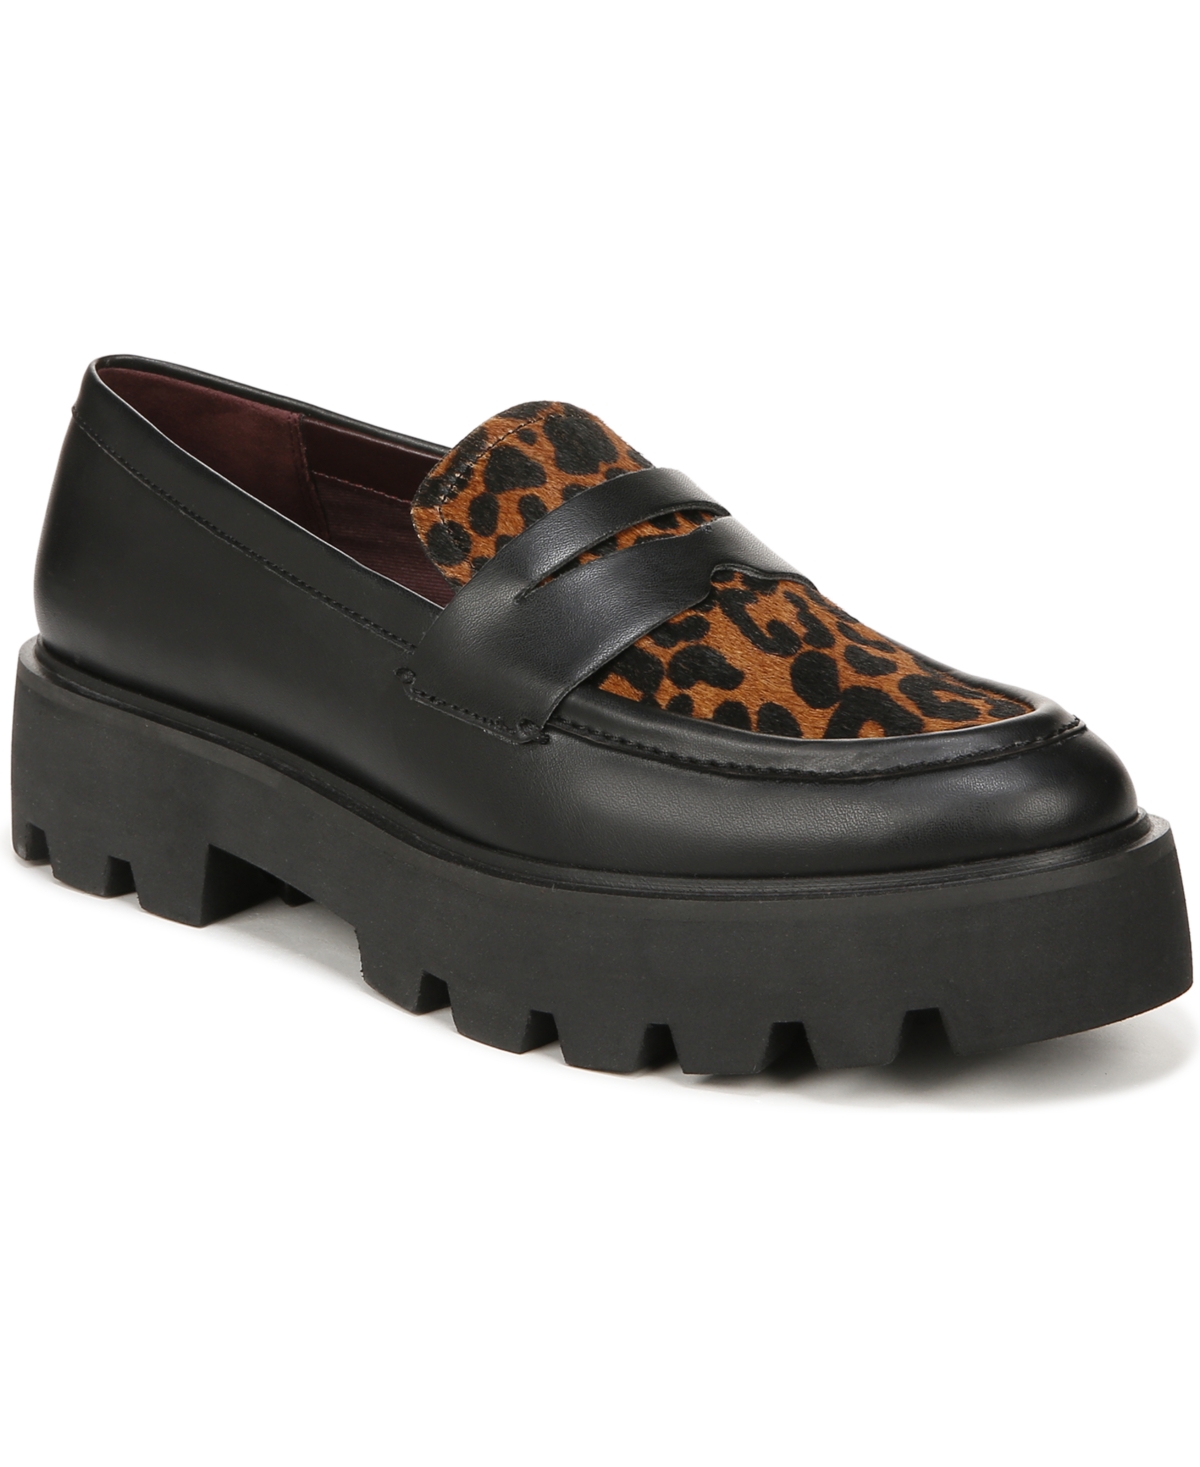 Balin Lug Sole Loafers - Black Faux Leather/Leopard Print Hair